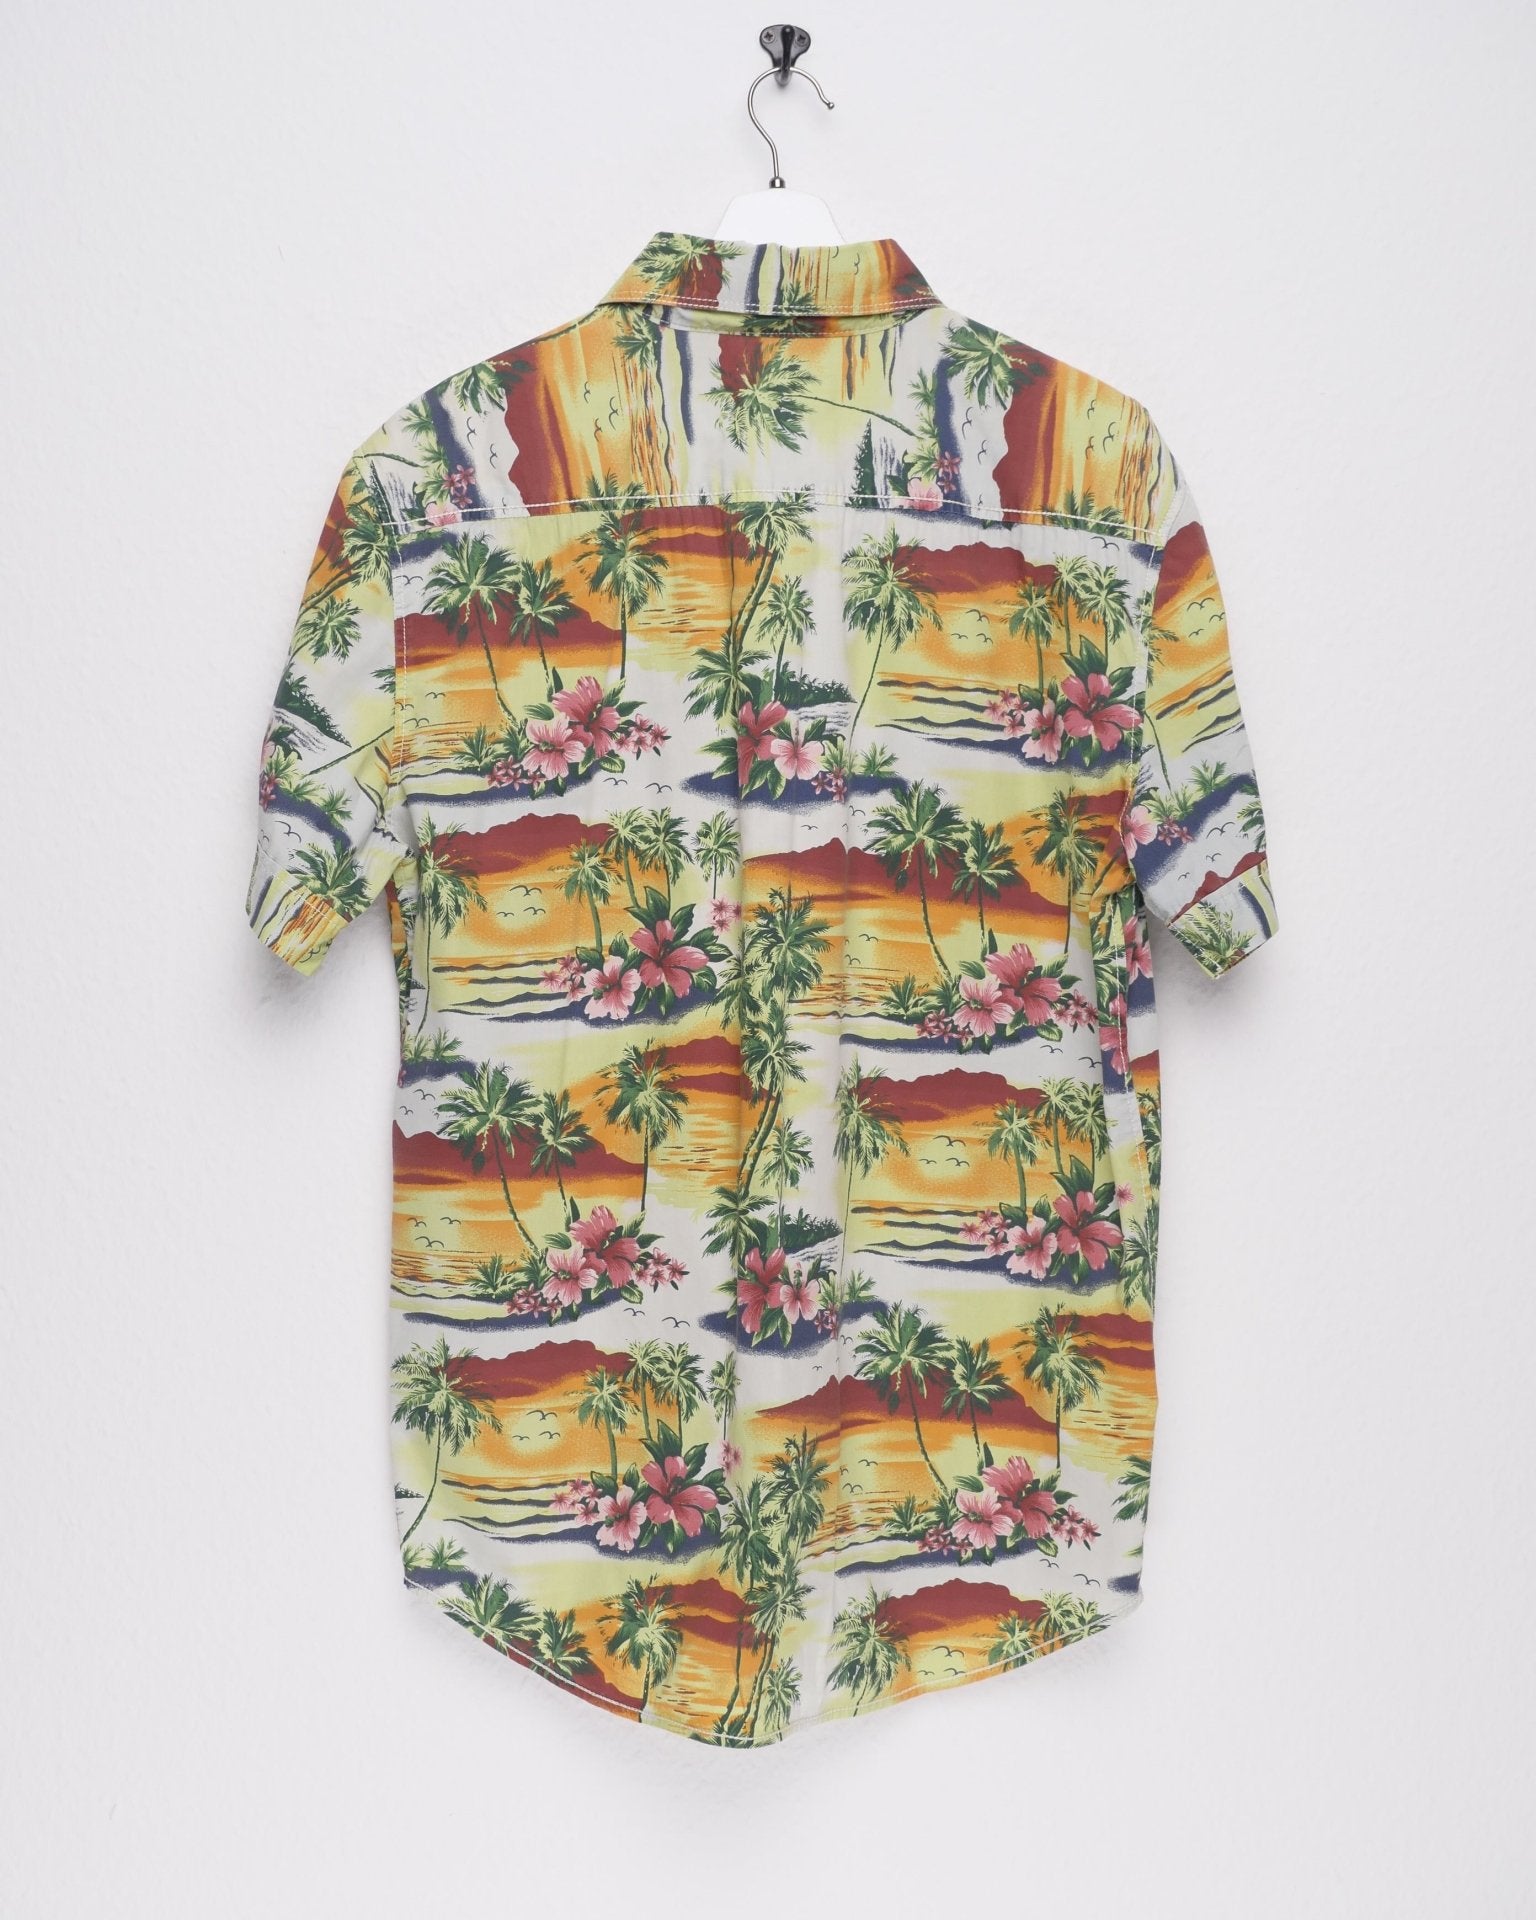 'Vacation' printed Pattern multicolored S/S Hemd - Peeces